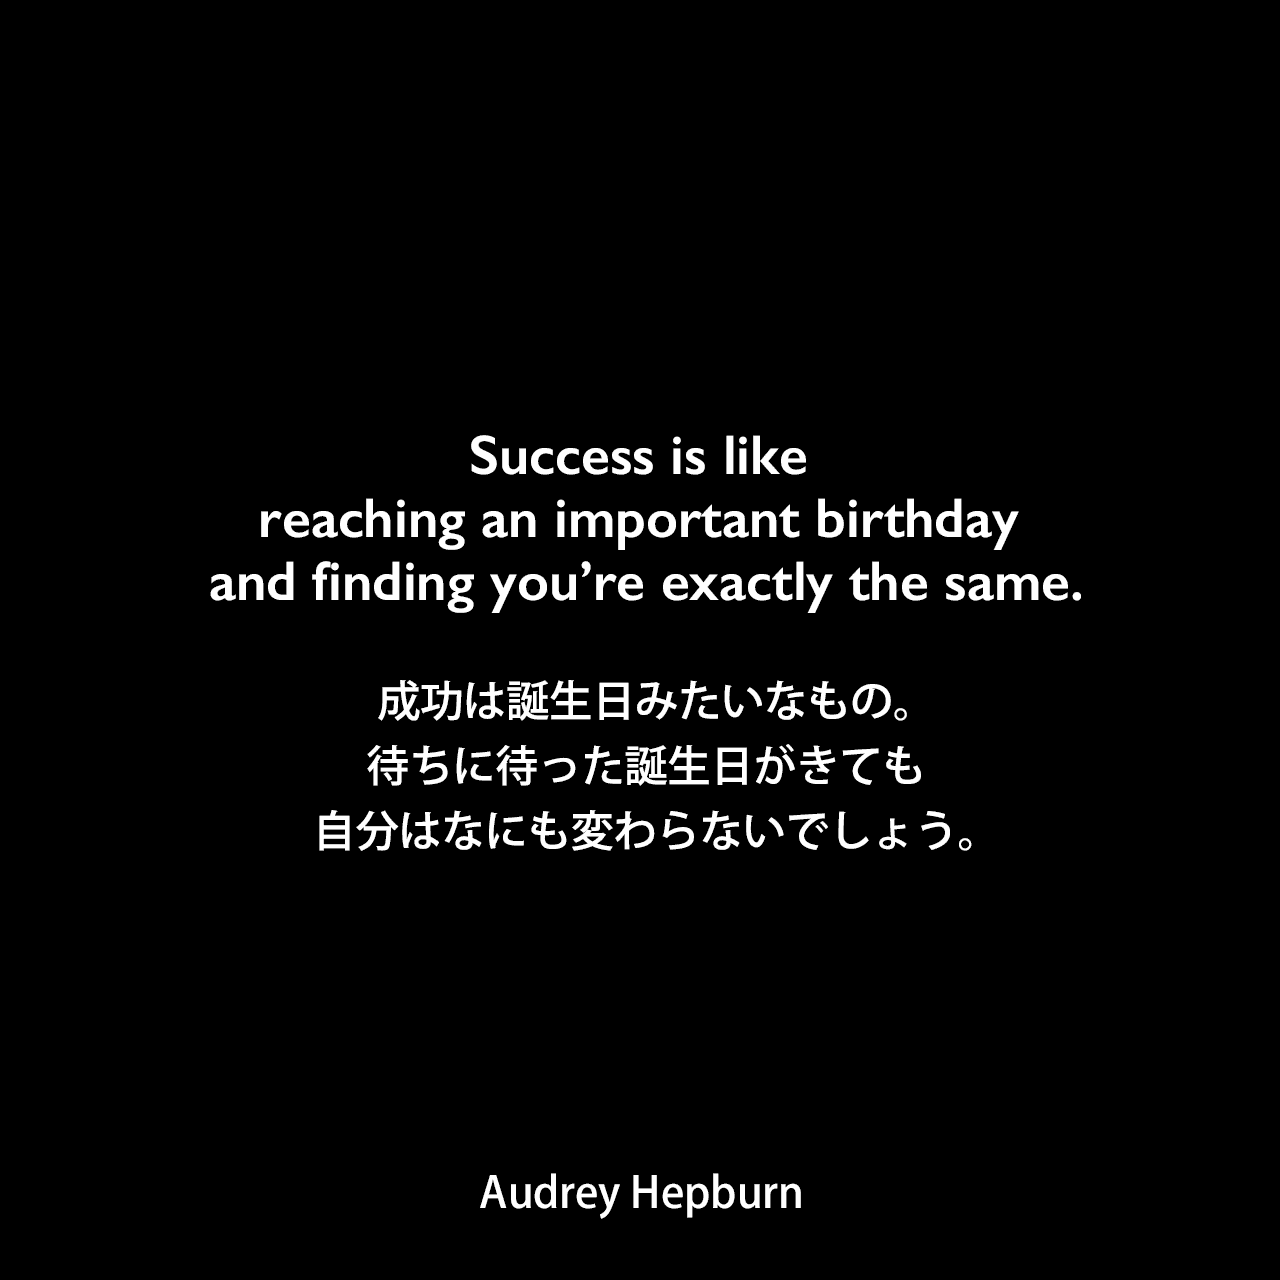 Success is like reaching an important birthday and finding you’re exactly the same.成功は誕生日みたいなもの。待ちに待った誕生日がきても、自分はなにも変わらないでしょう。- Yann-Brice Dherbierの本「Audrey Hepburn A Life in Pictures」よりAudrey Hepburn